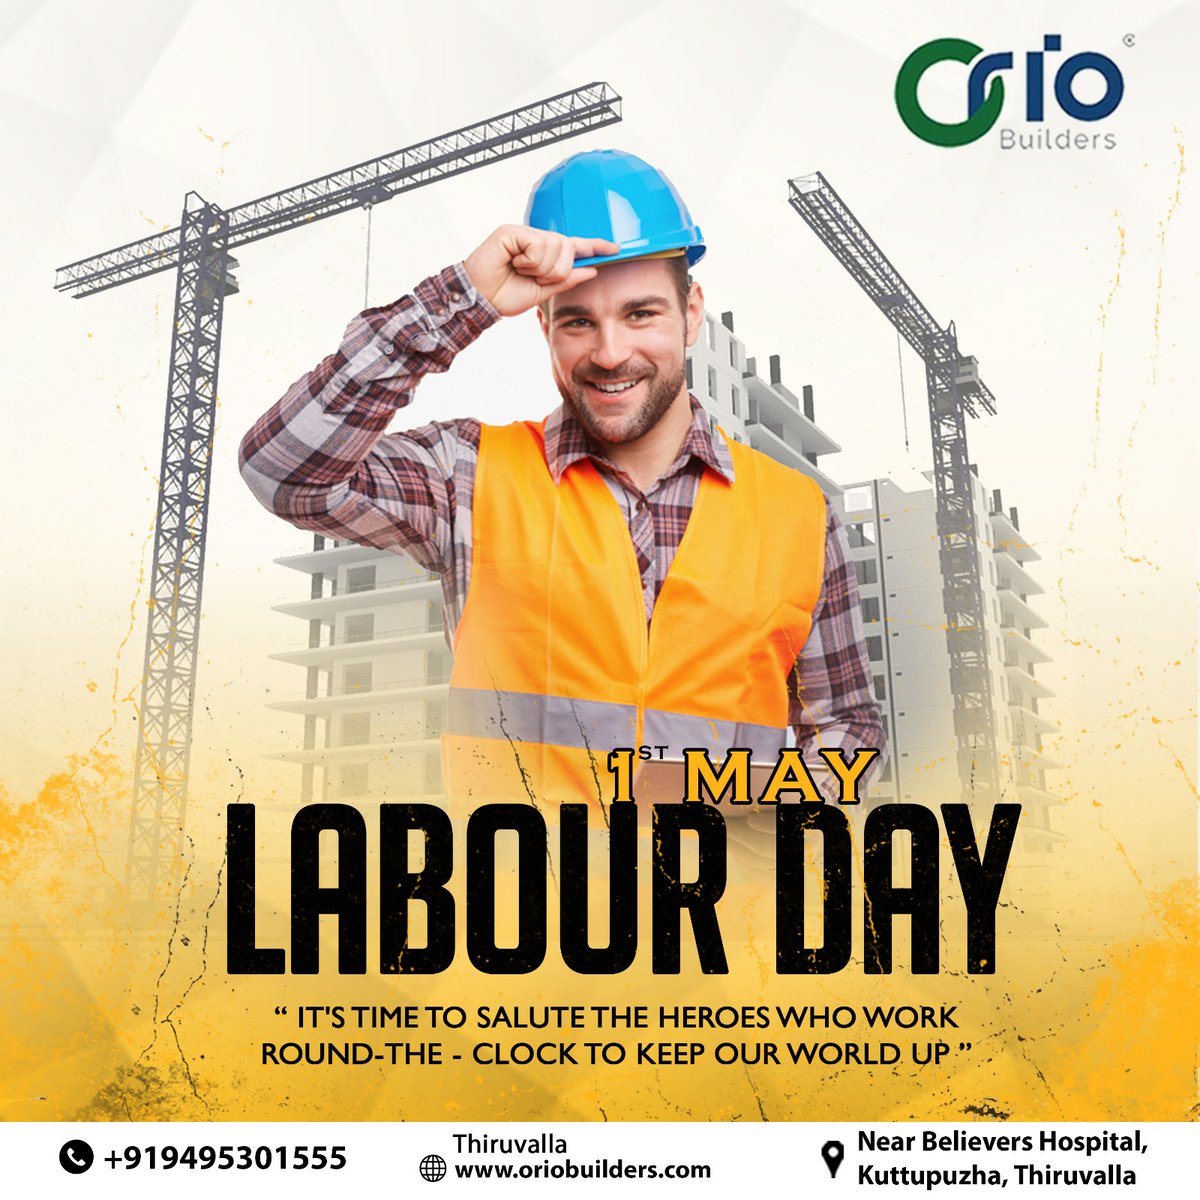 Labour Day, is a day dedicated to honoring the contributions of workers and their achievements in advancing labor rights. It's observed on May 1st, known as International Workers' Day.

#LabourDay2024 #WorkersRights #WorkersUnite #LabourMovement #WorkforceEquality